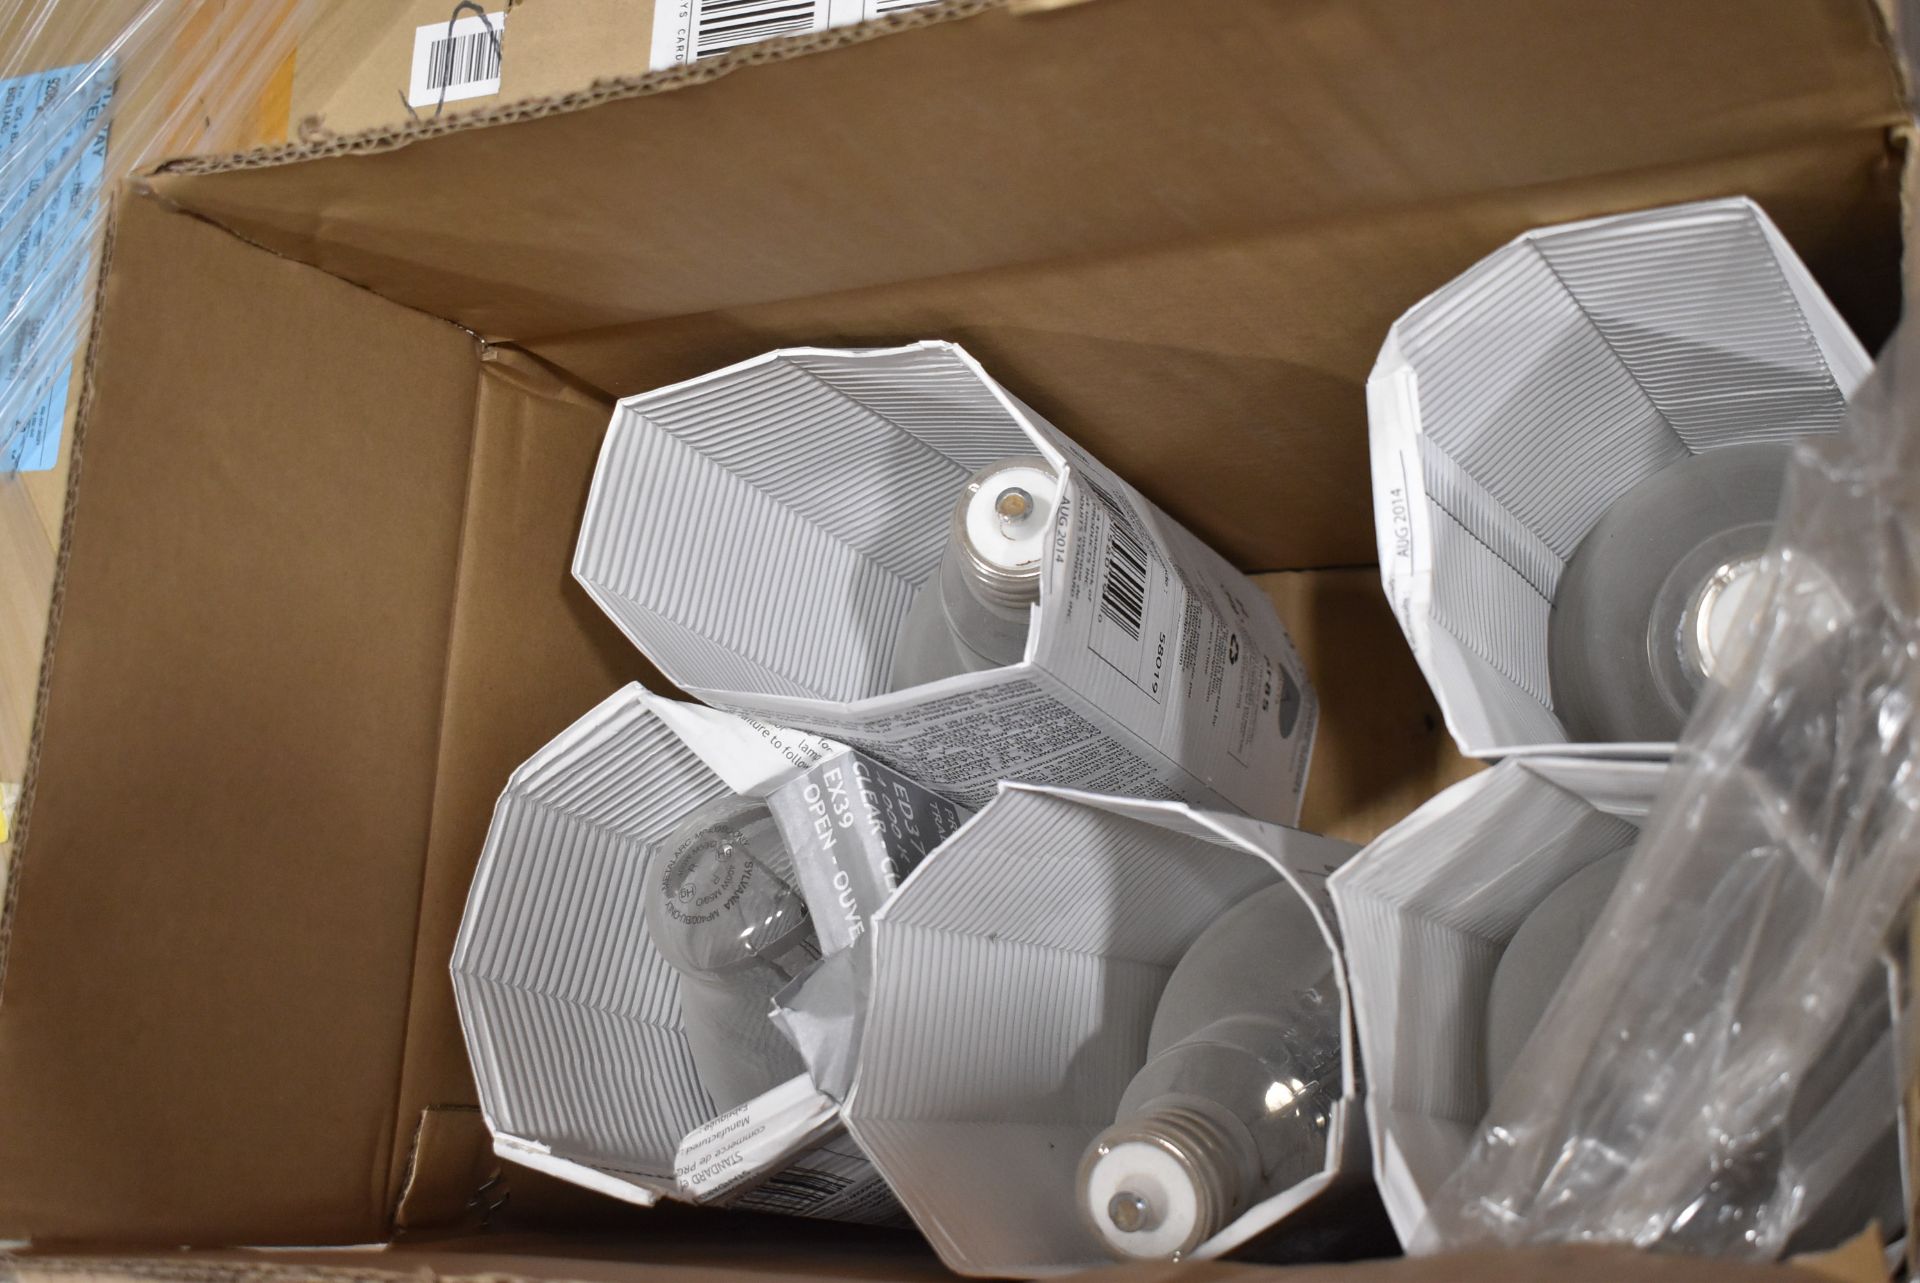 LOT/ SKID WITH STANDARD HID 400W OVERHEAD LIGHT BULBS (CMD WAREHOUSE) [CMD-185-22S] - Image 2 of 6